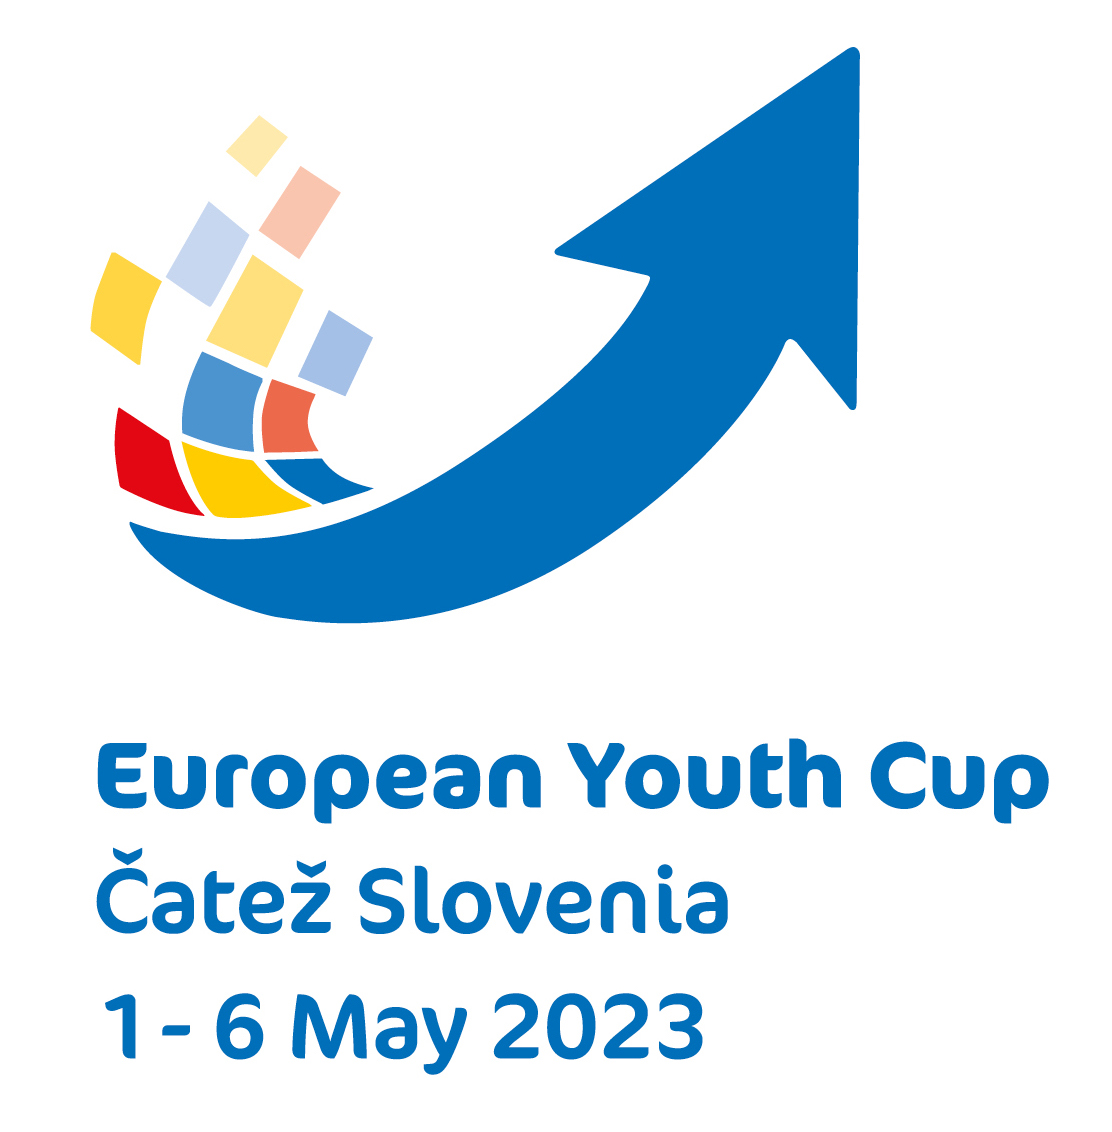 images/news_2023/European_Youth_Cup_1_Catez/European_Youth_Cup_2023.jpg